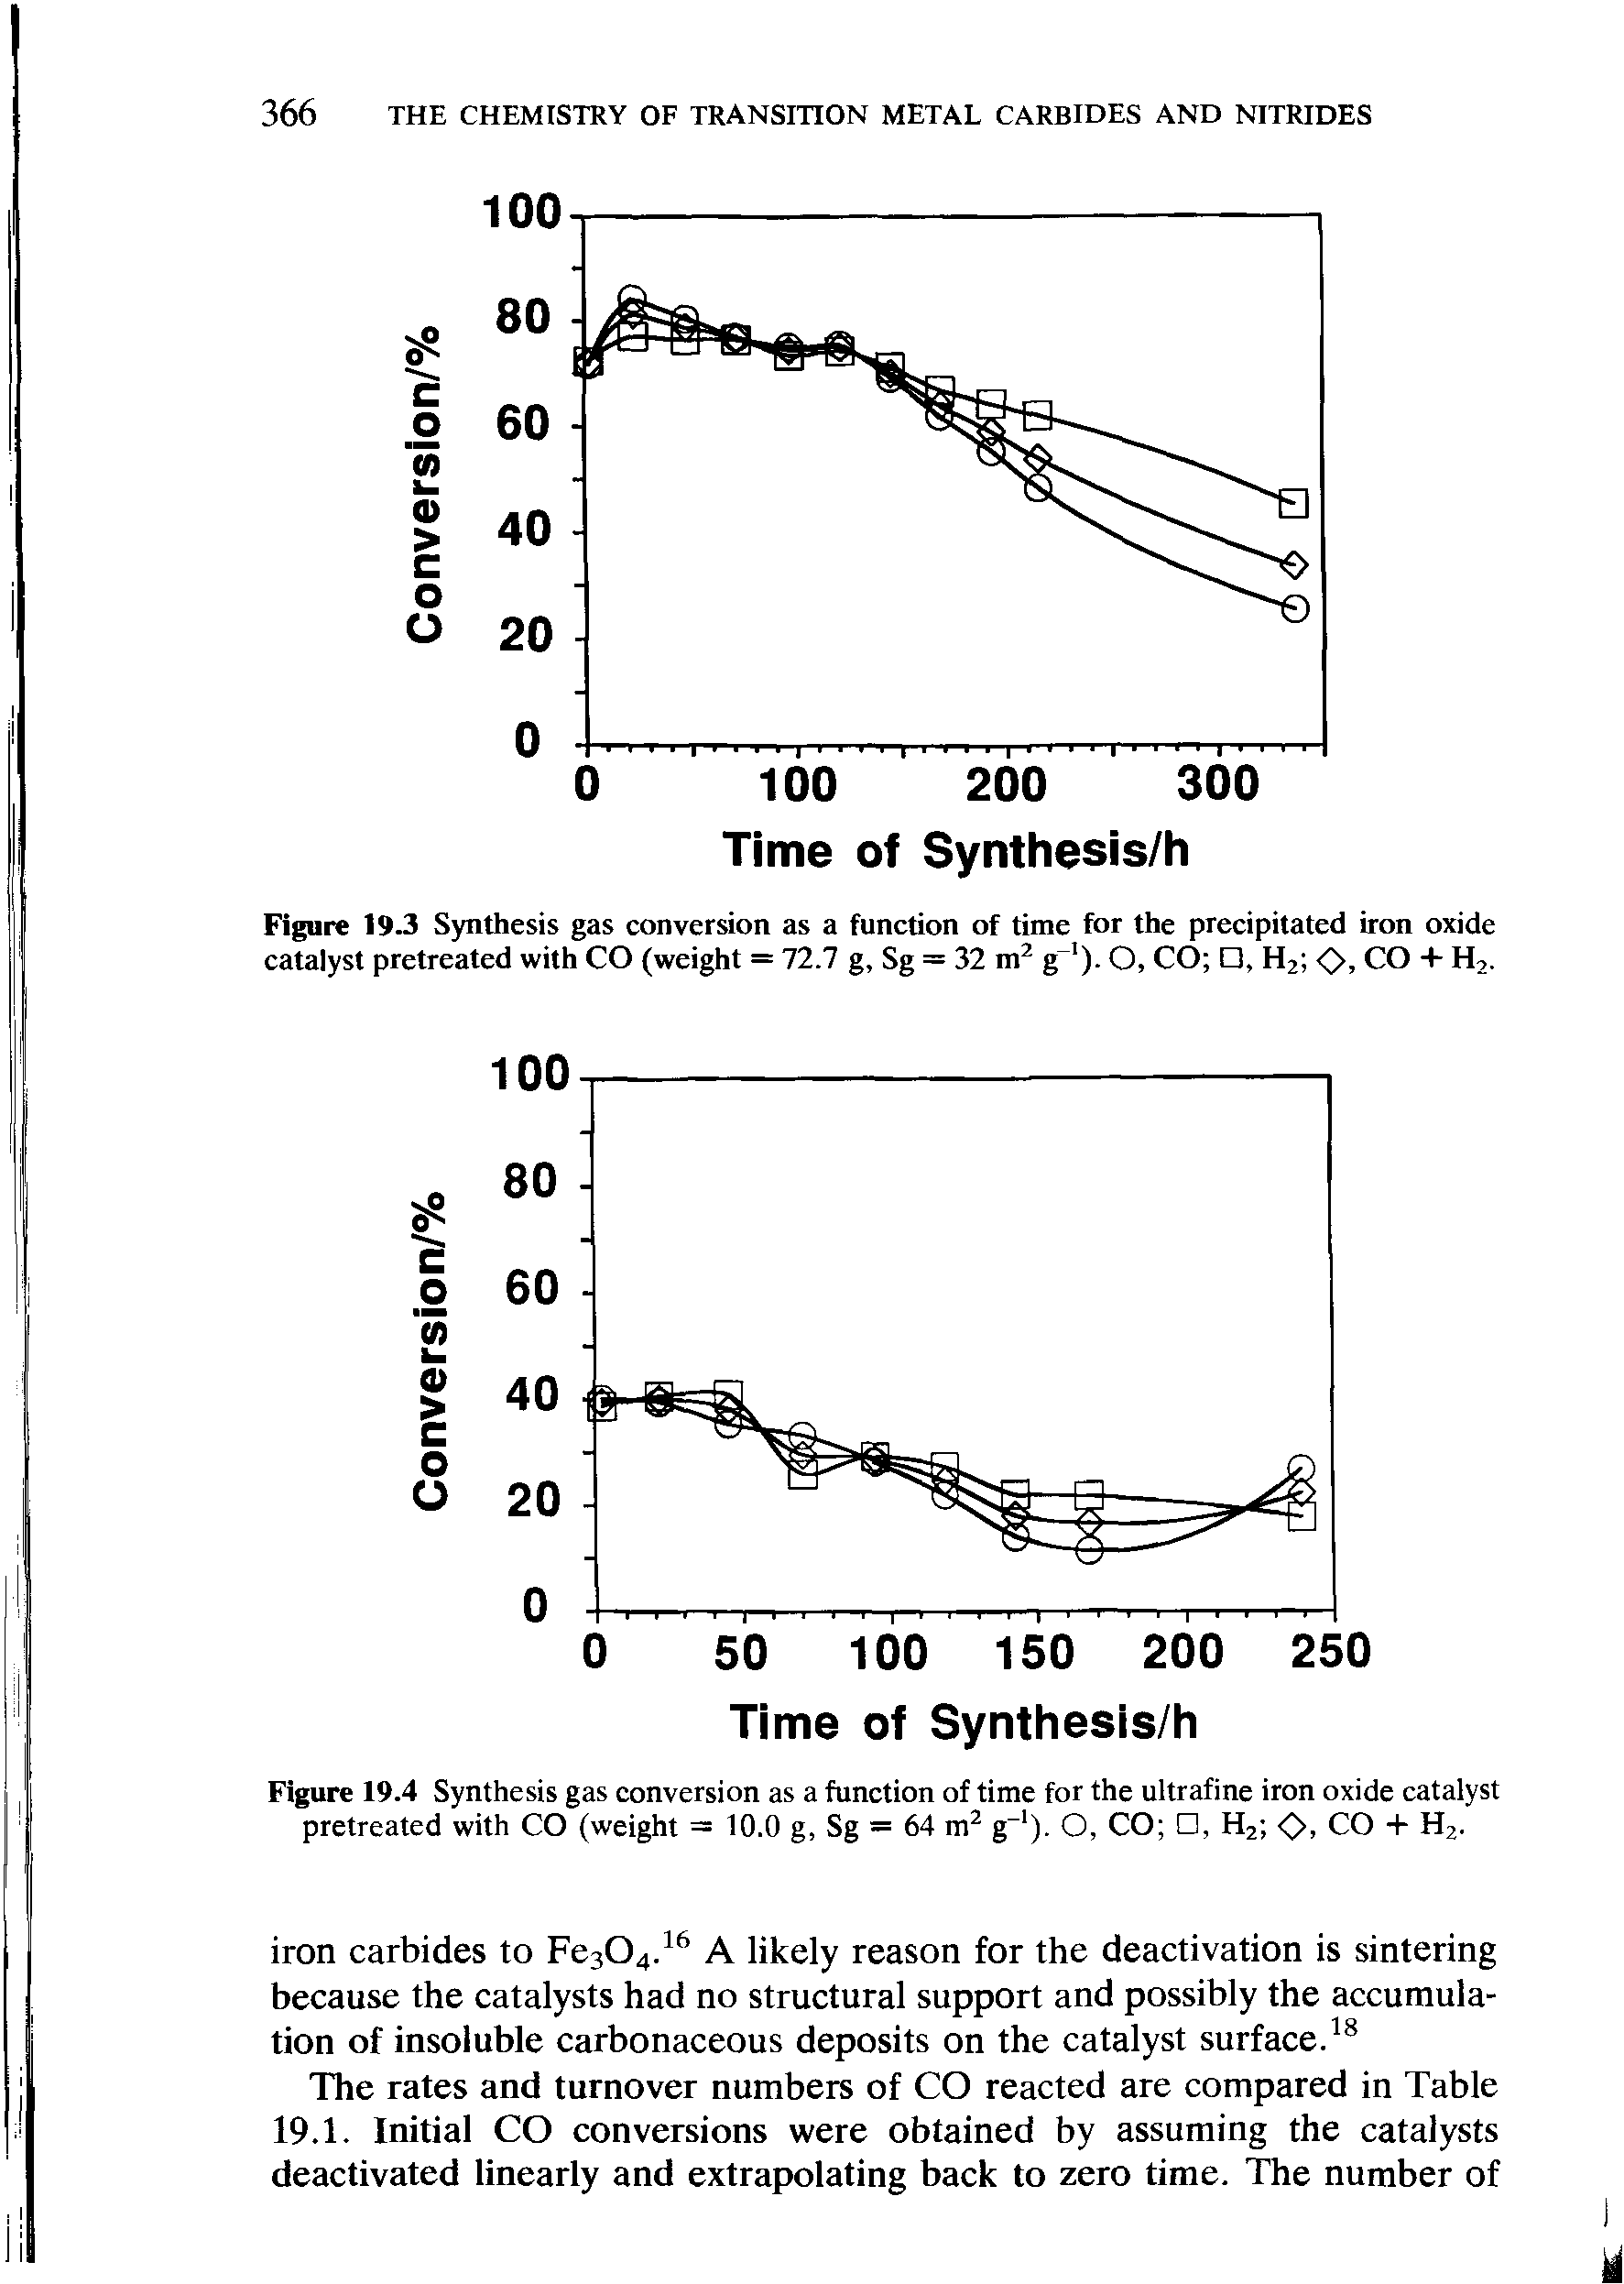 Figure 19.3 Synthesis gas conversion as a function of time for the precipitated iron oxide catalyst pretreated with CO (weight = 72.7 g, Sg = 32 m2 g ). O, CO , H2 O, CO + H2.